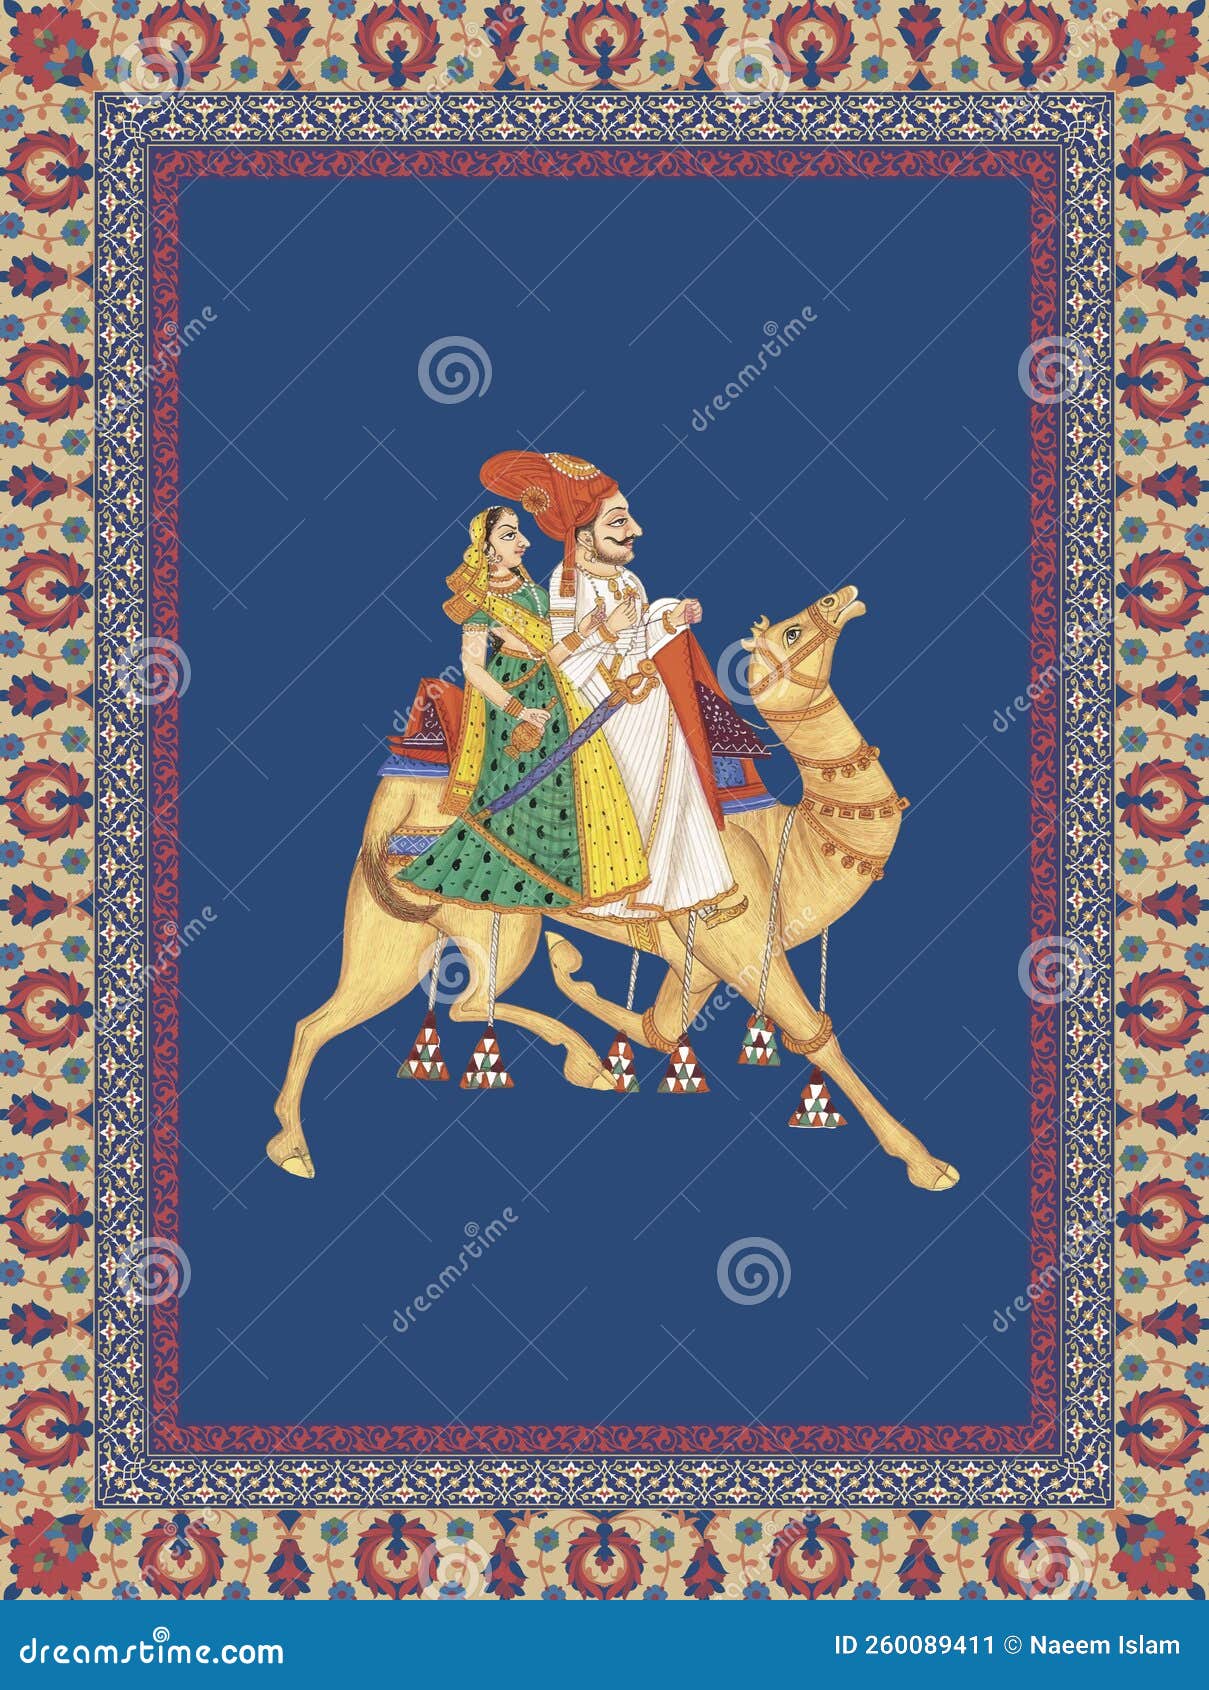 indian mughal emperor, queen with festive camel riding, adorned with regal accessories.   frame